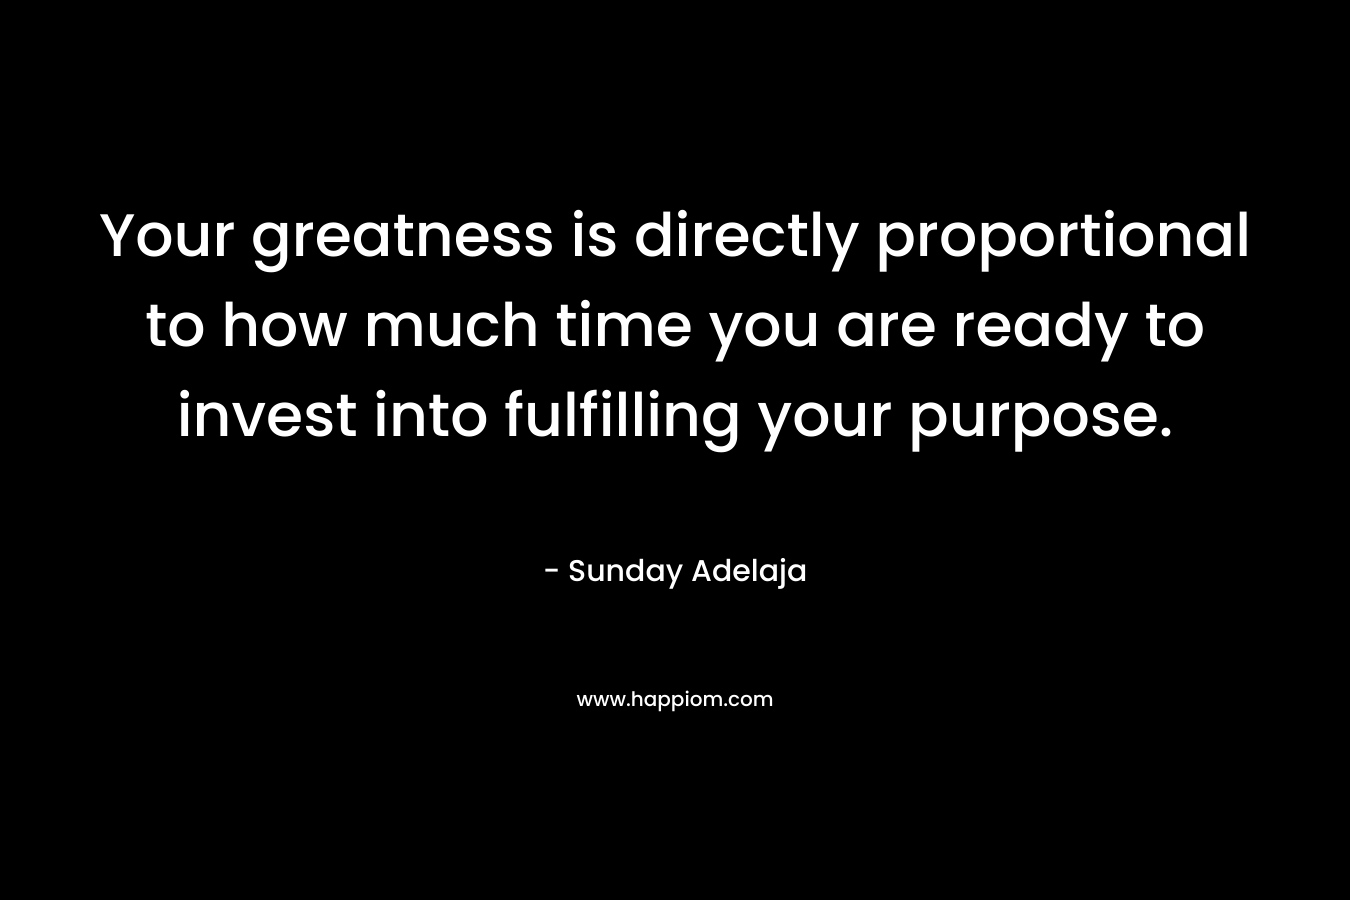 Your greatness is directly proportional to how much time you are ready to invest into fulfilling your purpose.